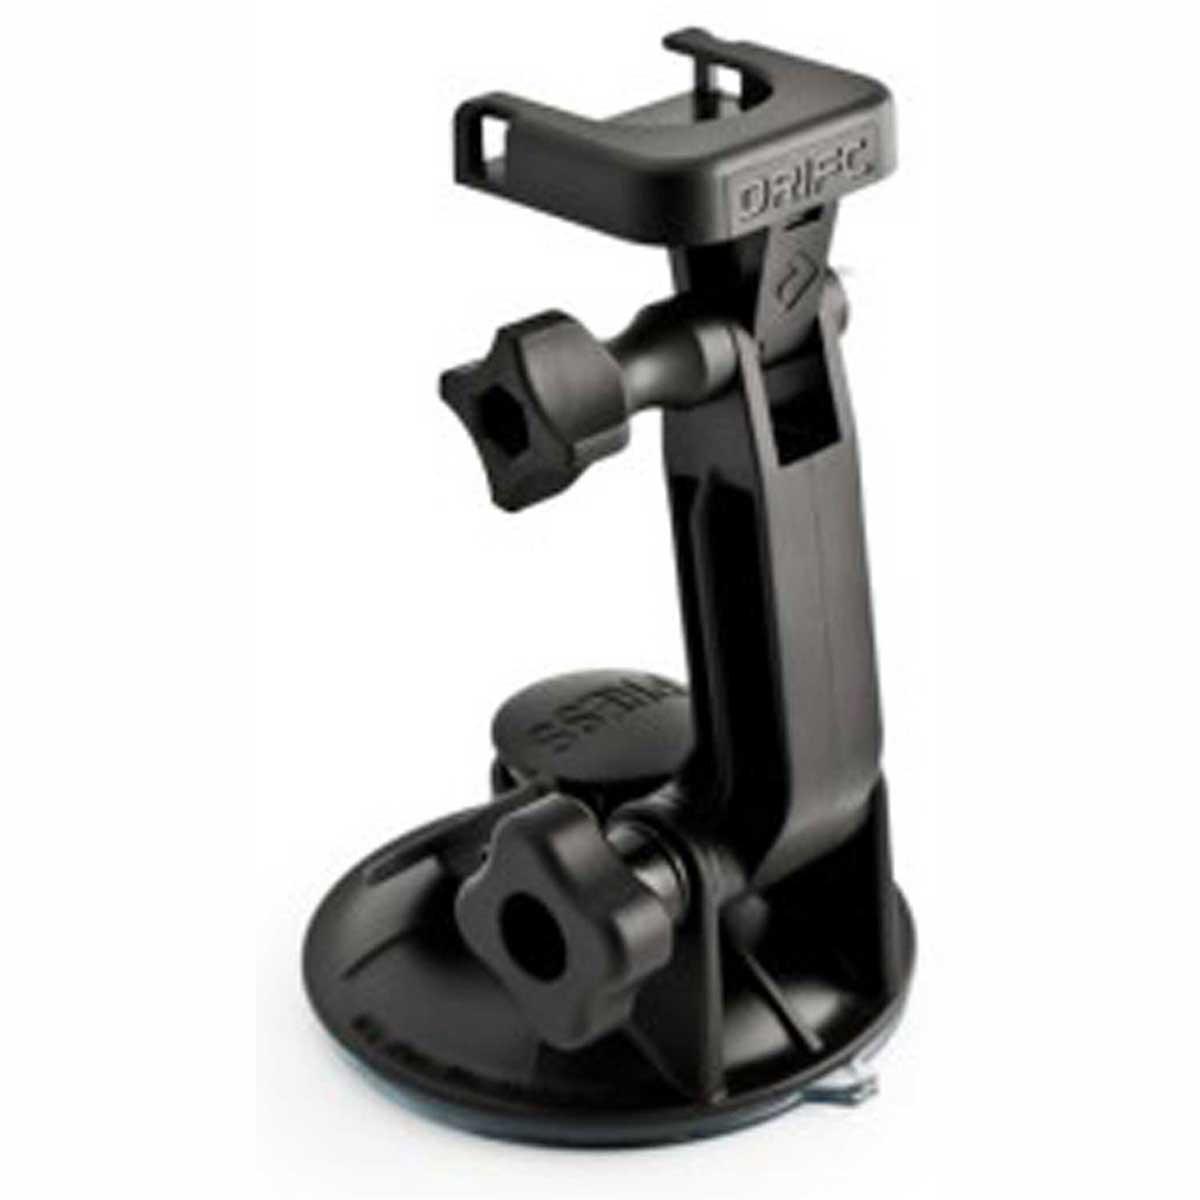 Drift HD Ghost Video Camera Suction Mount Black - Browse our range of Accessories: Camera - getgearedshop 